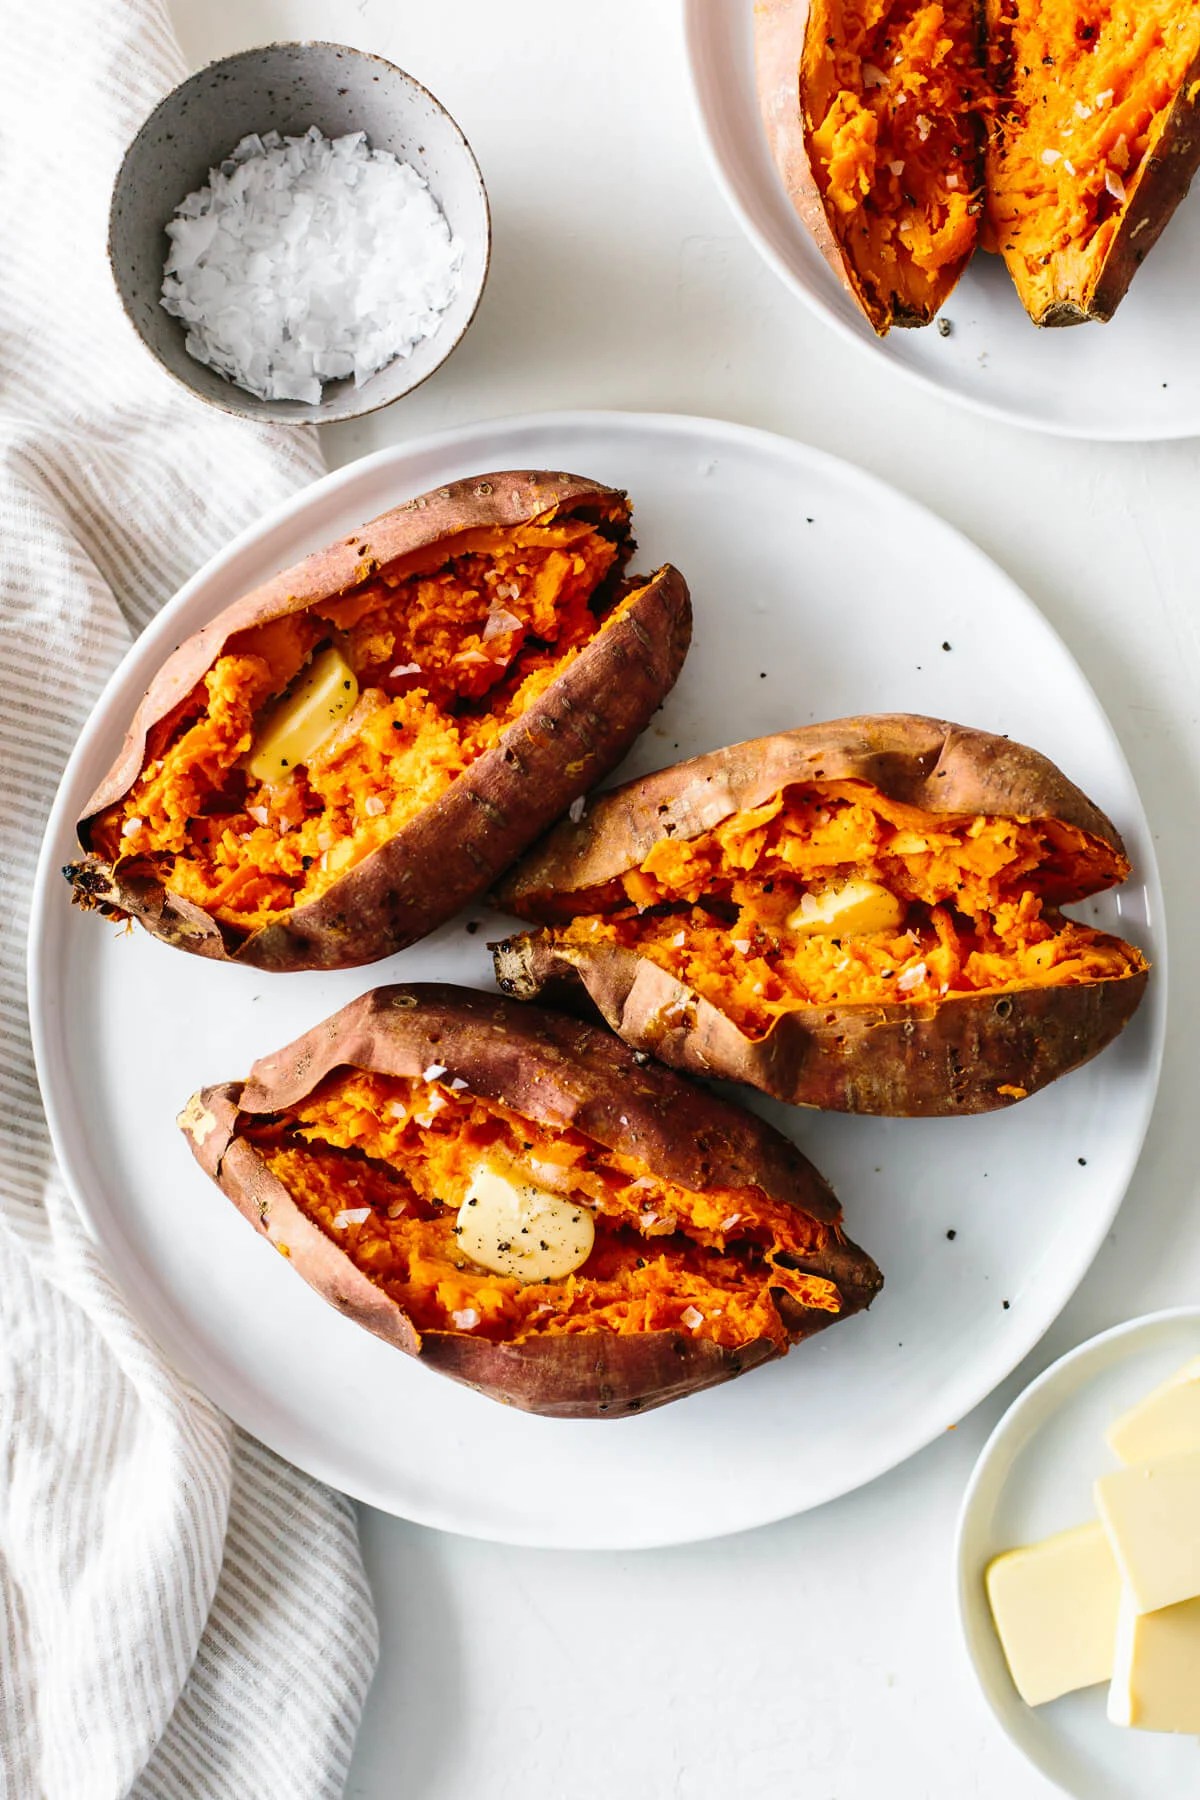 Baked sweet potatoes on a white plate.